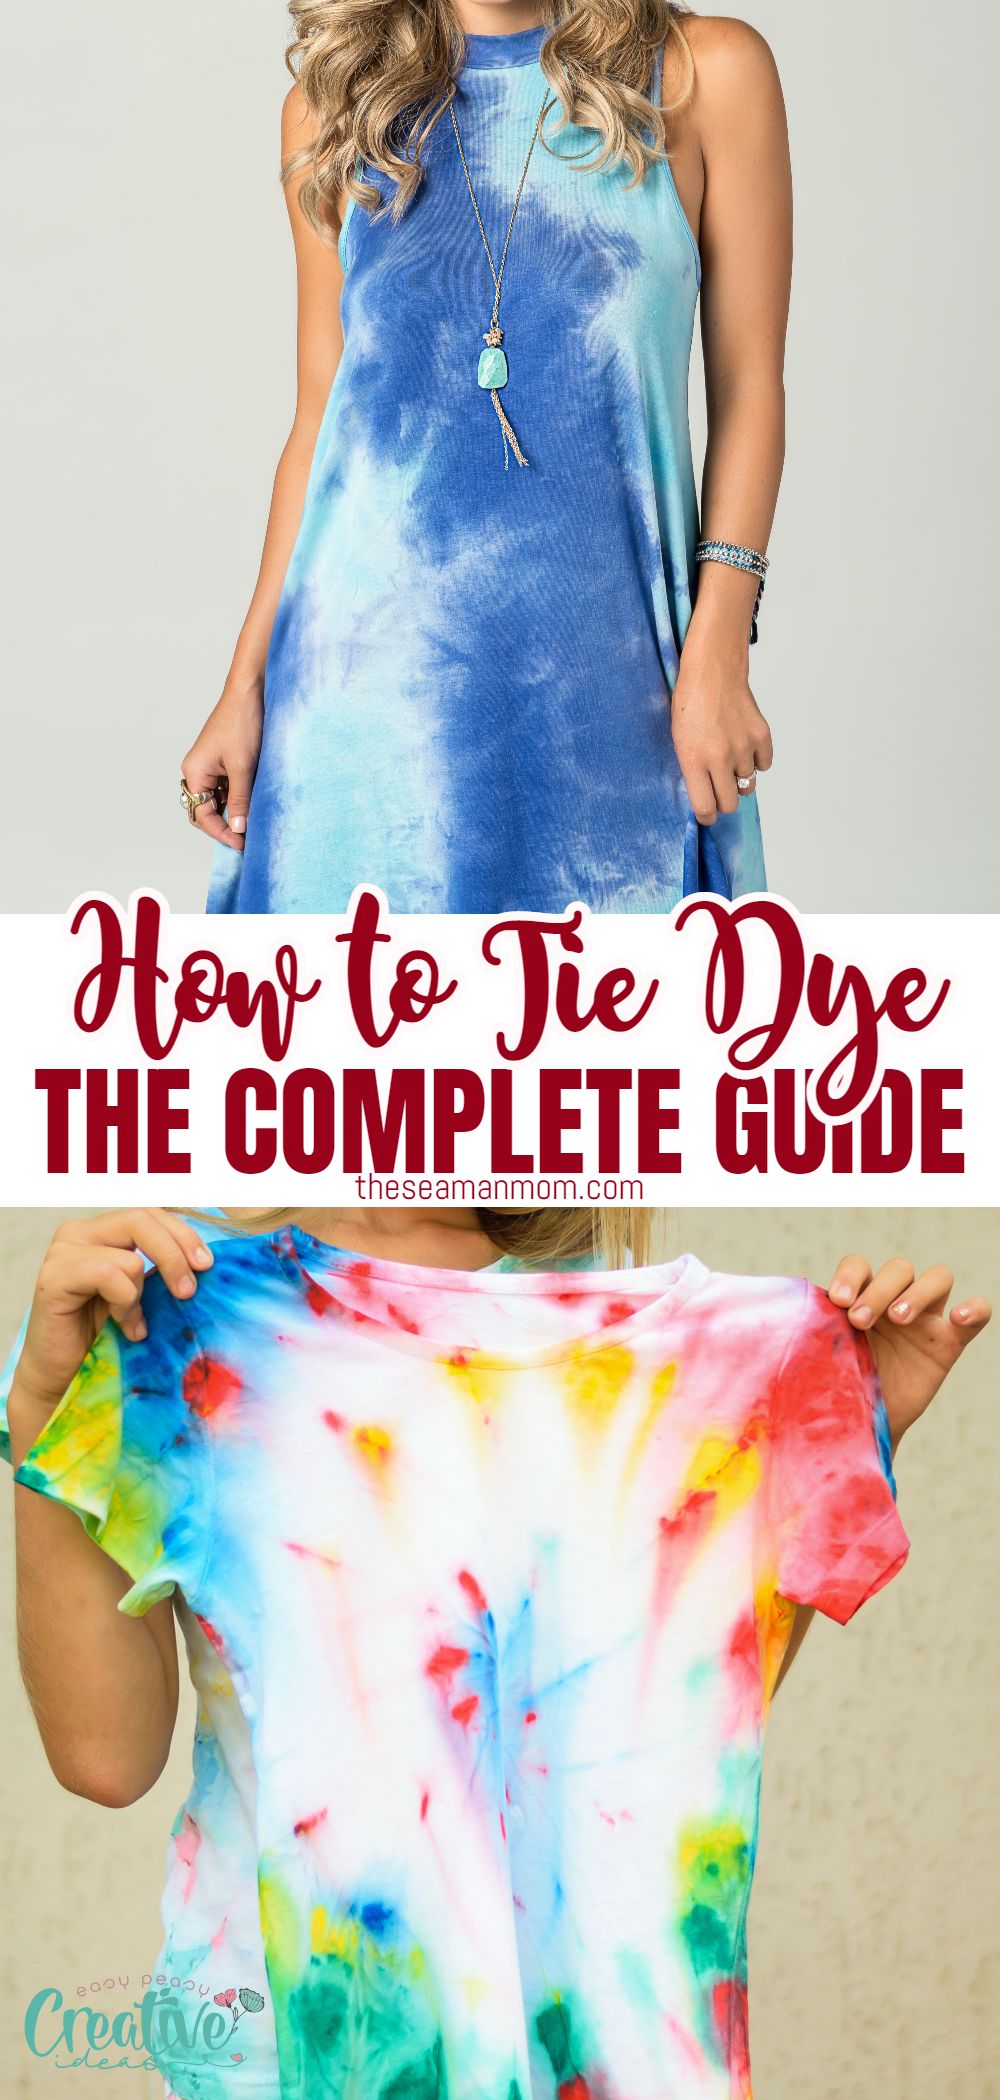 Tie dye is a fun and easy way to add some color and excitement to your wardrobe. This tutorial will show you how to tie dye at home, using some simple supplies and techniques. With a little bit of practice, you'll be able to create beautiful designs that are perfect for any occasion. via @petroneagu